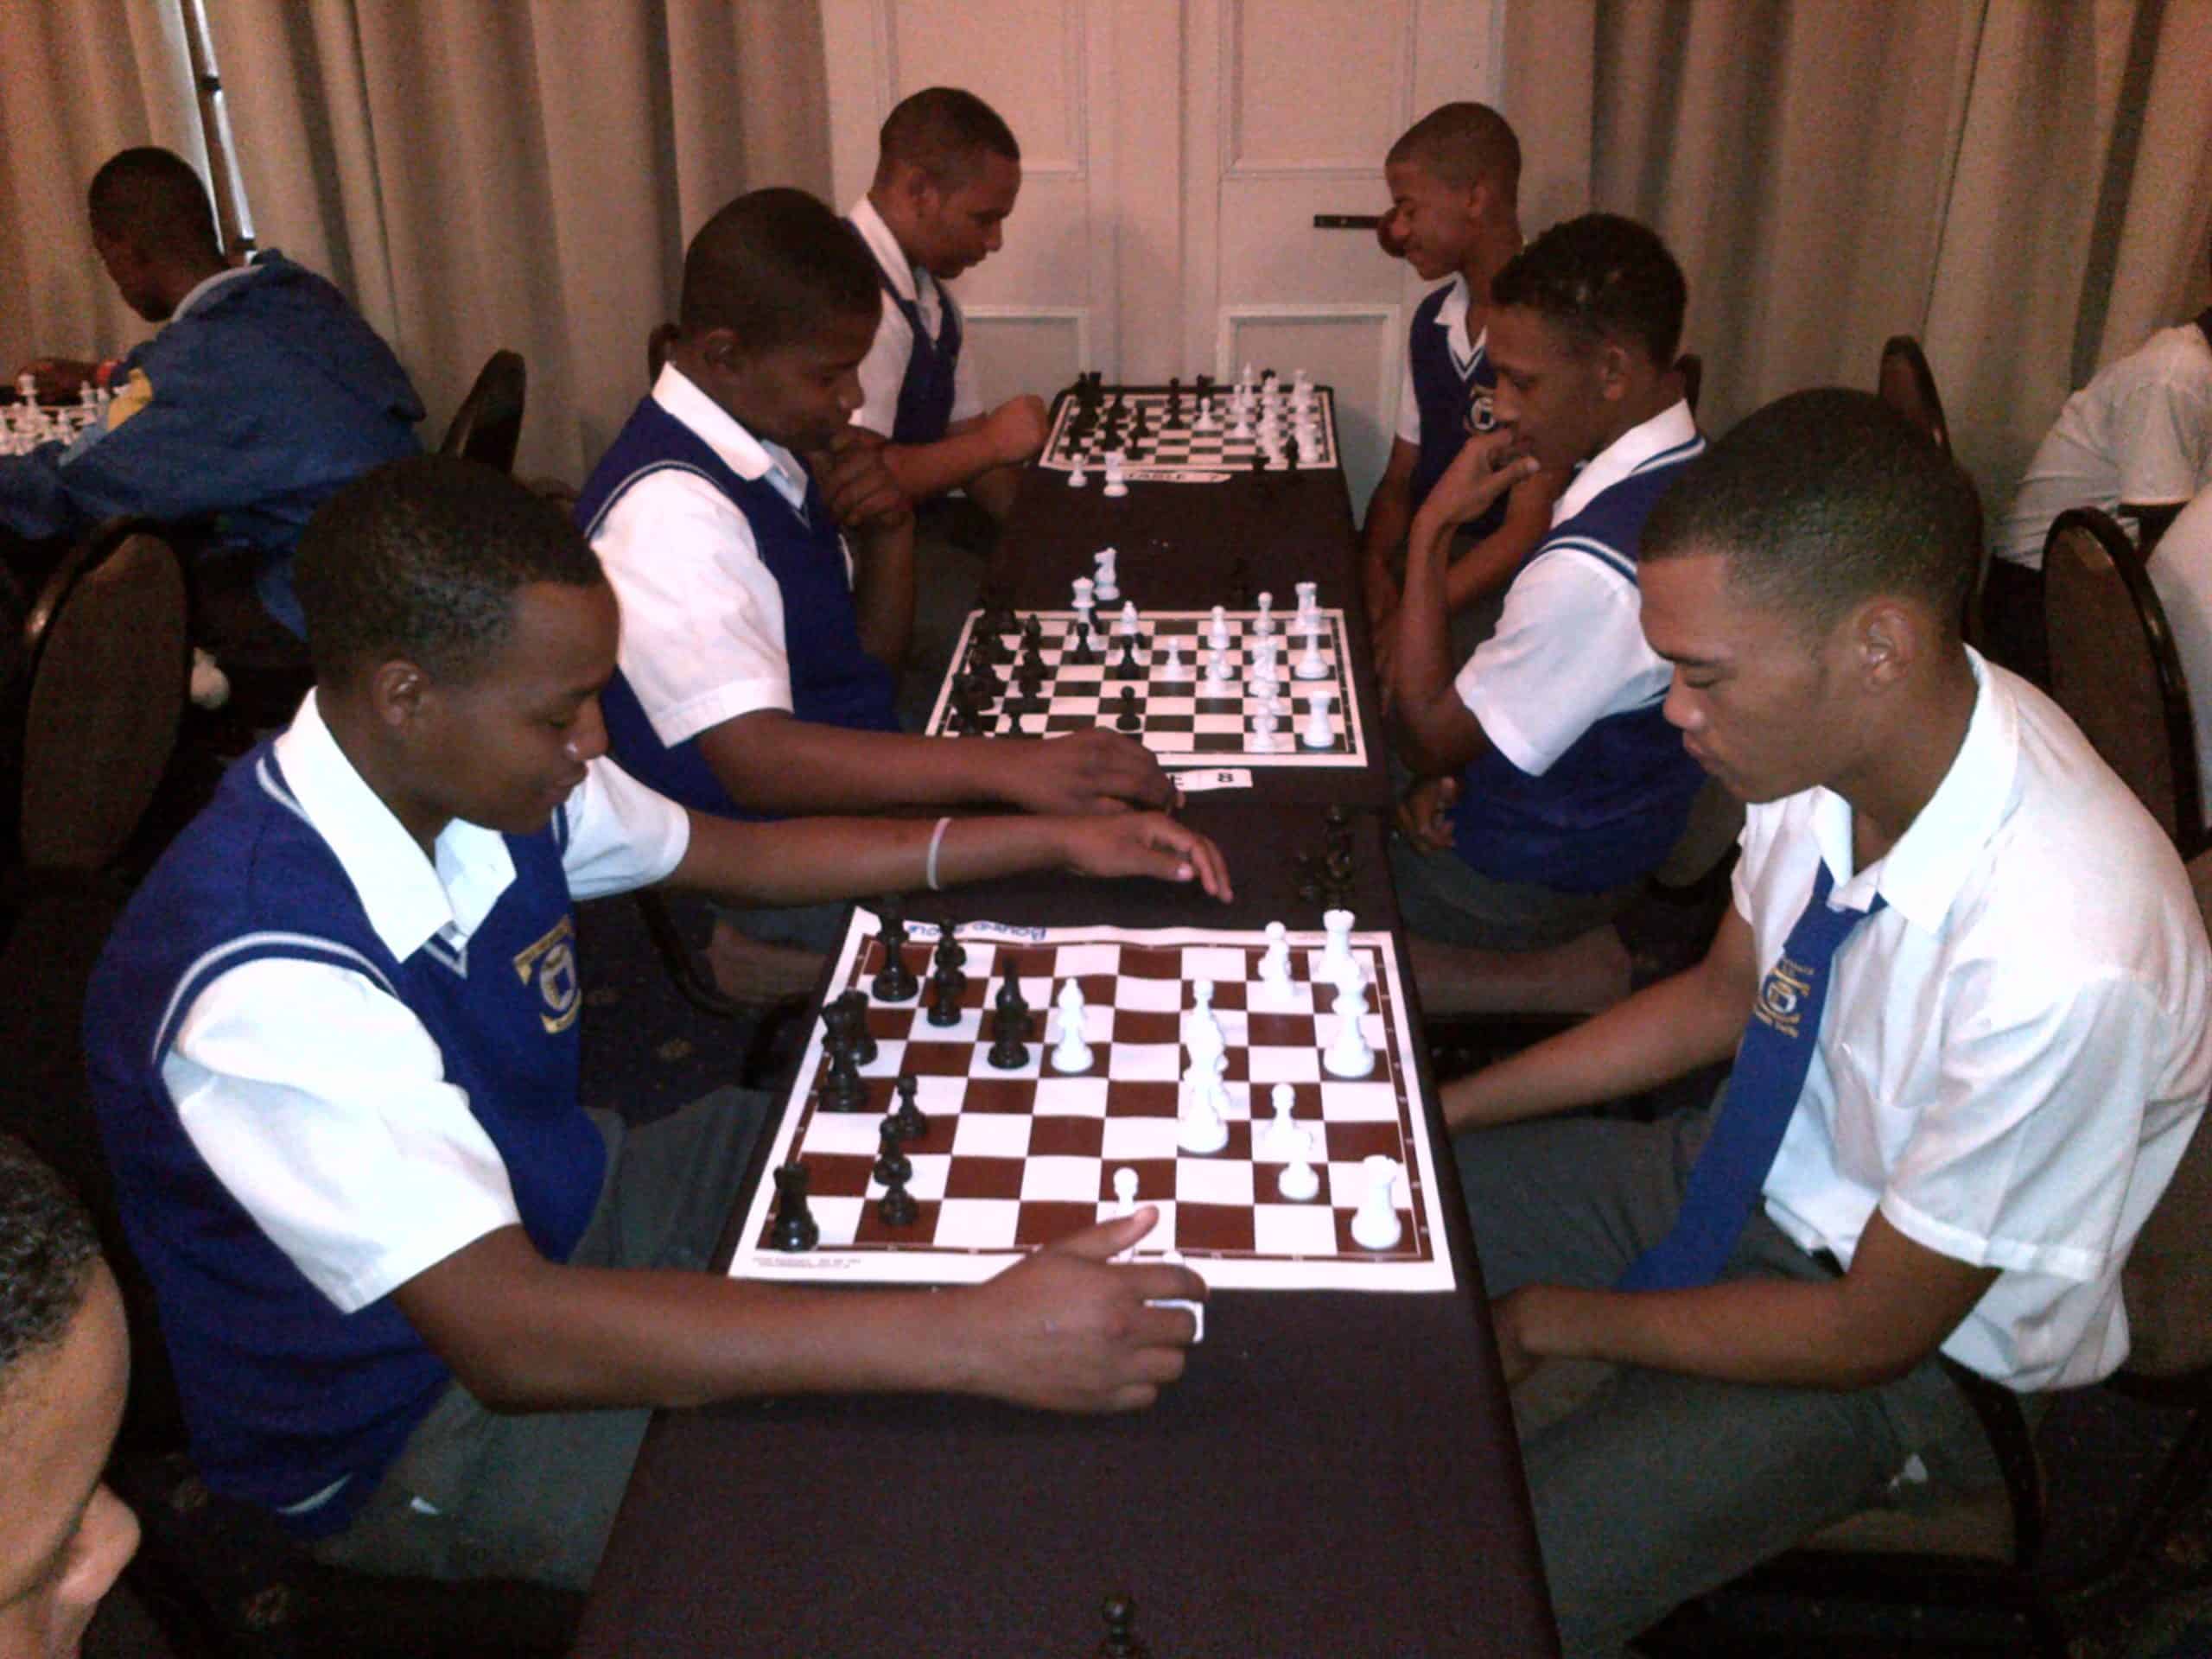 High school boys playing chess at The Caledon